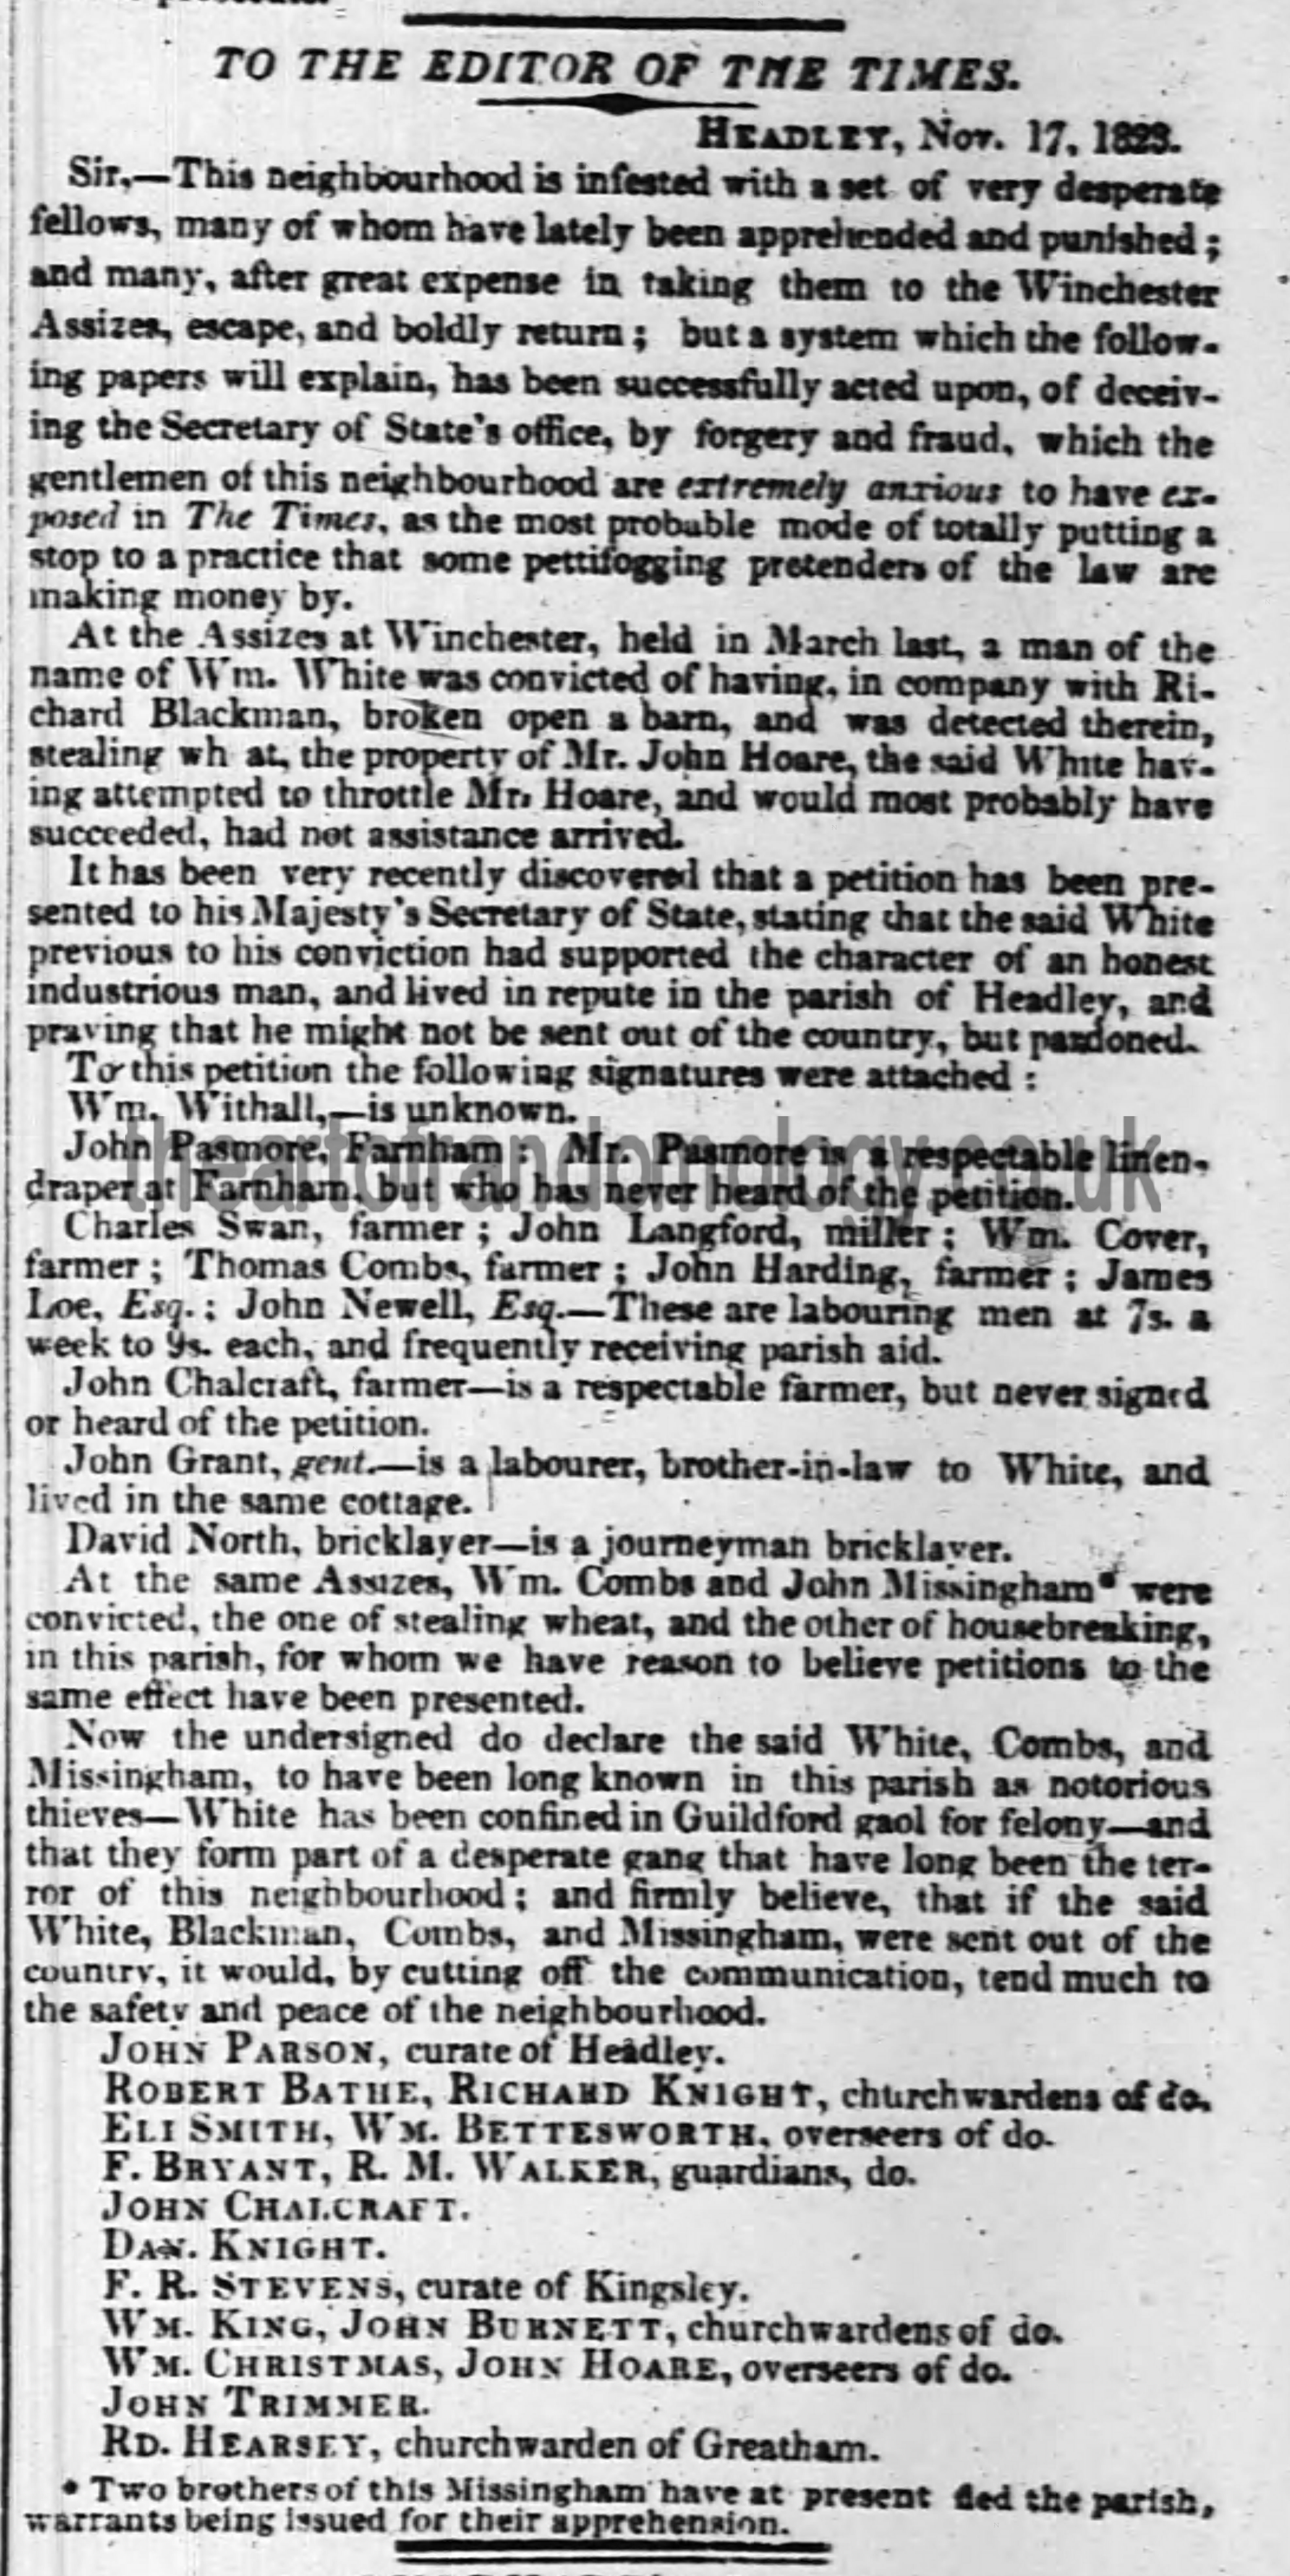 The Times, Wednesday November 19 1823